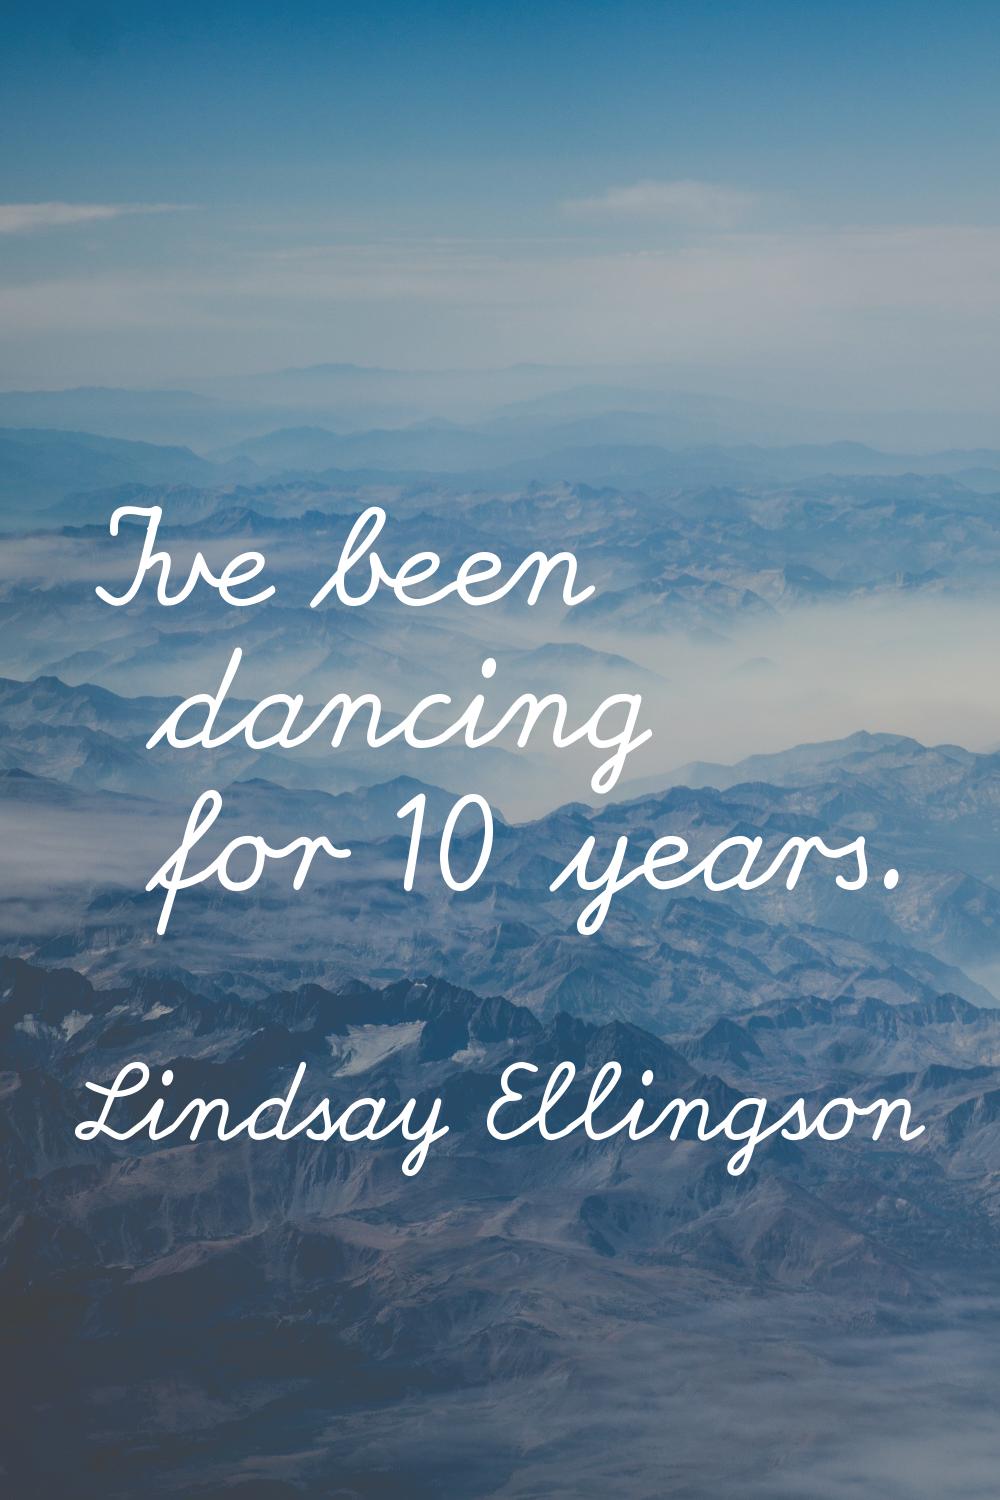 I've been dancing for 10 years.